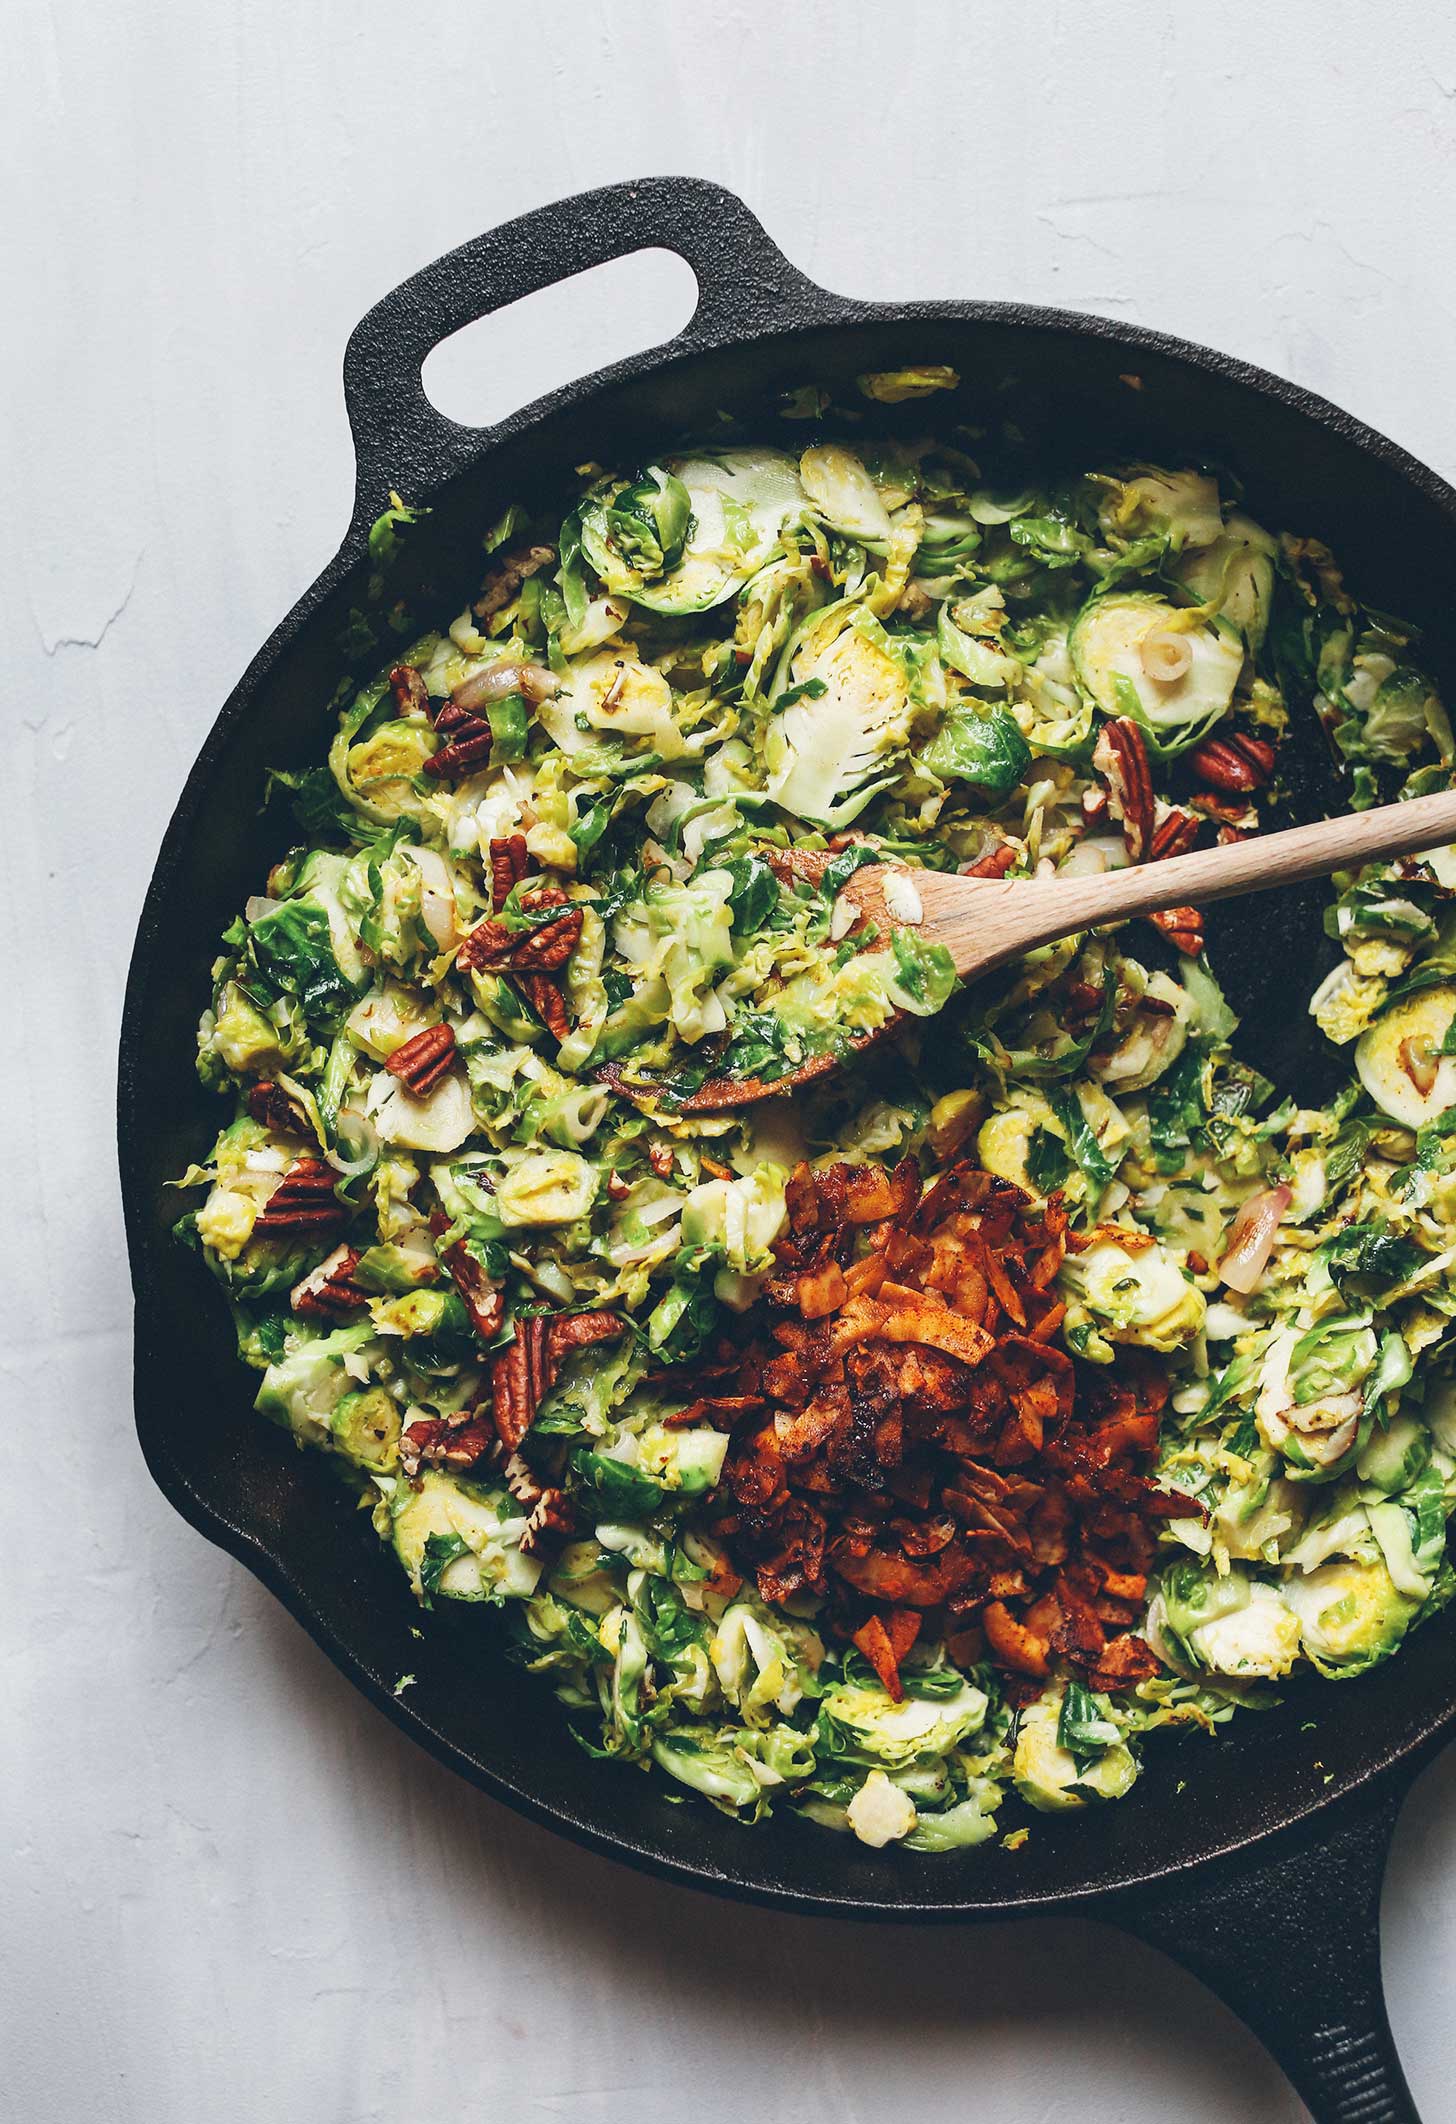 Adding vegan coconut bacon and pecans to our Warm Brussels Sprout Slaw recipe